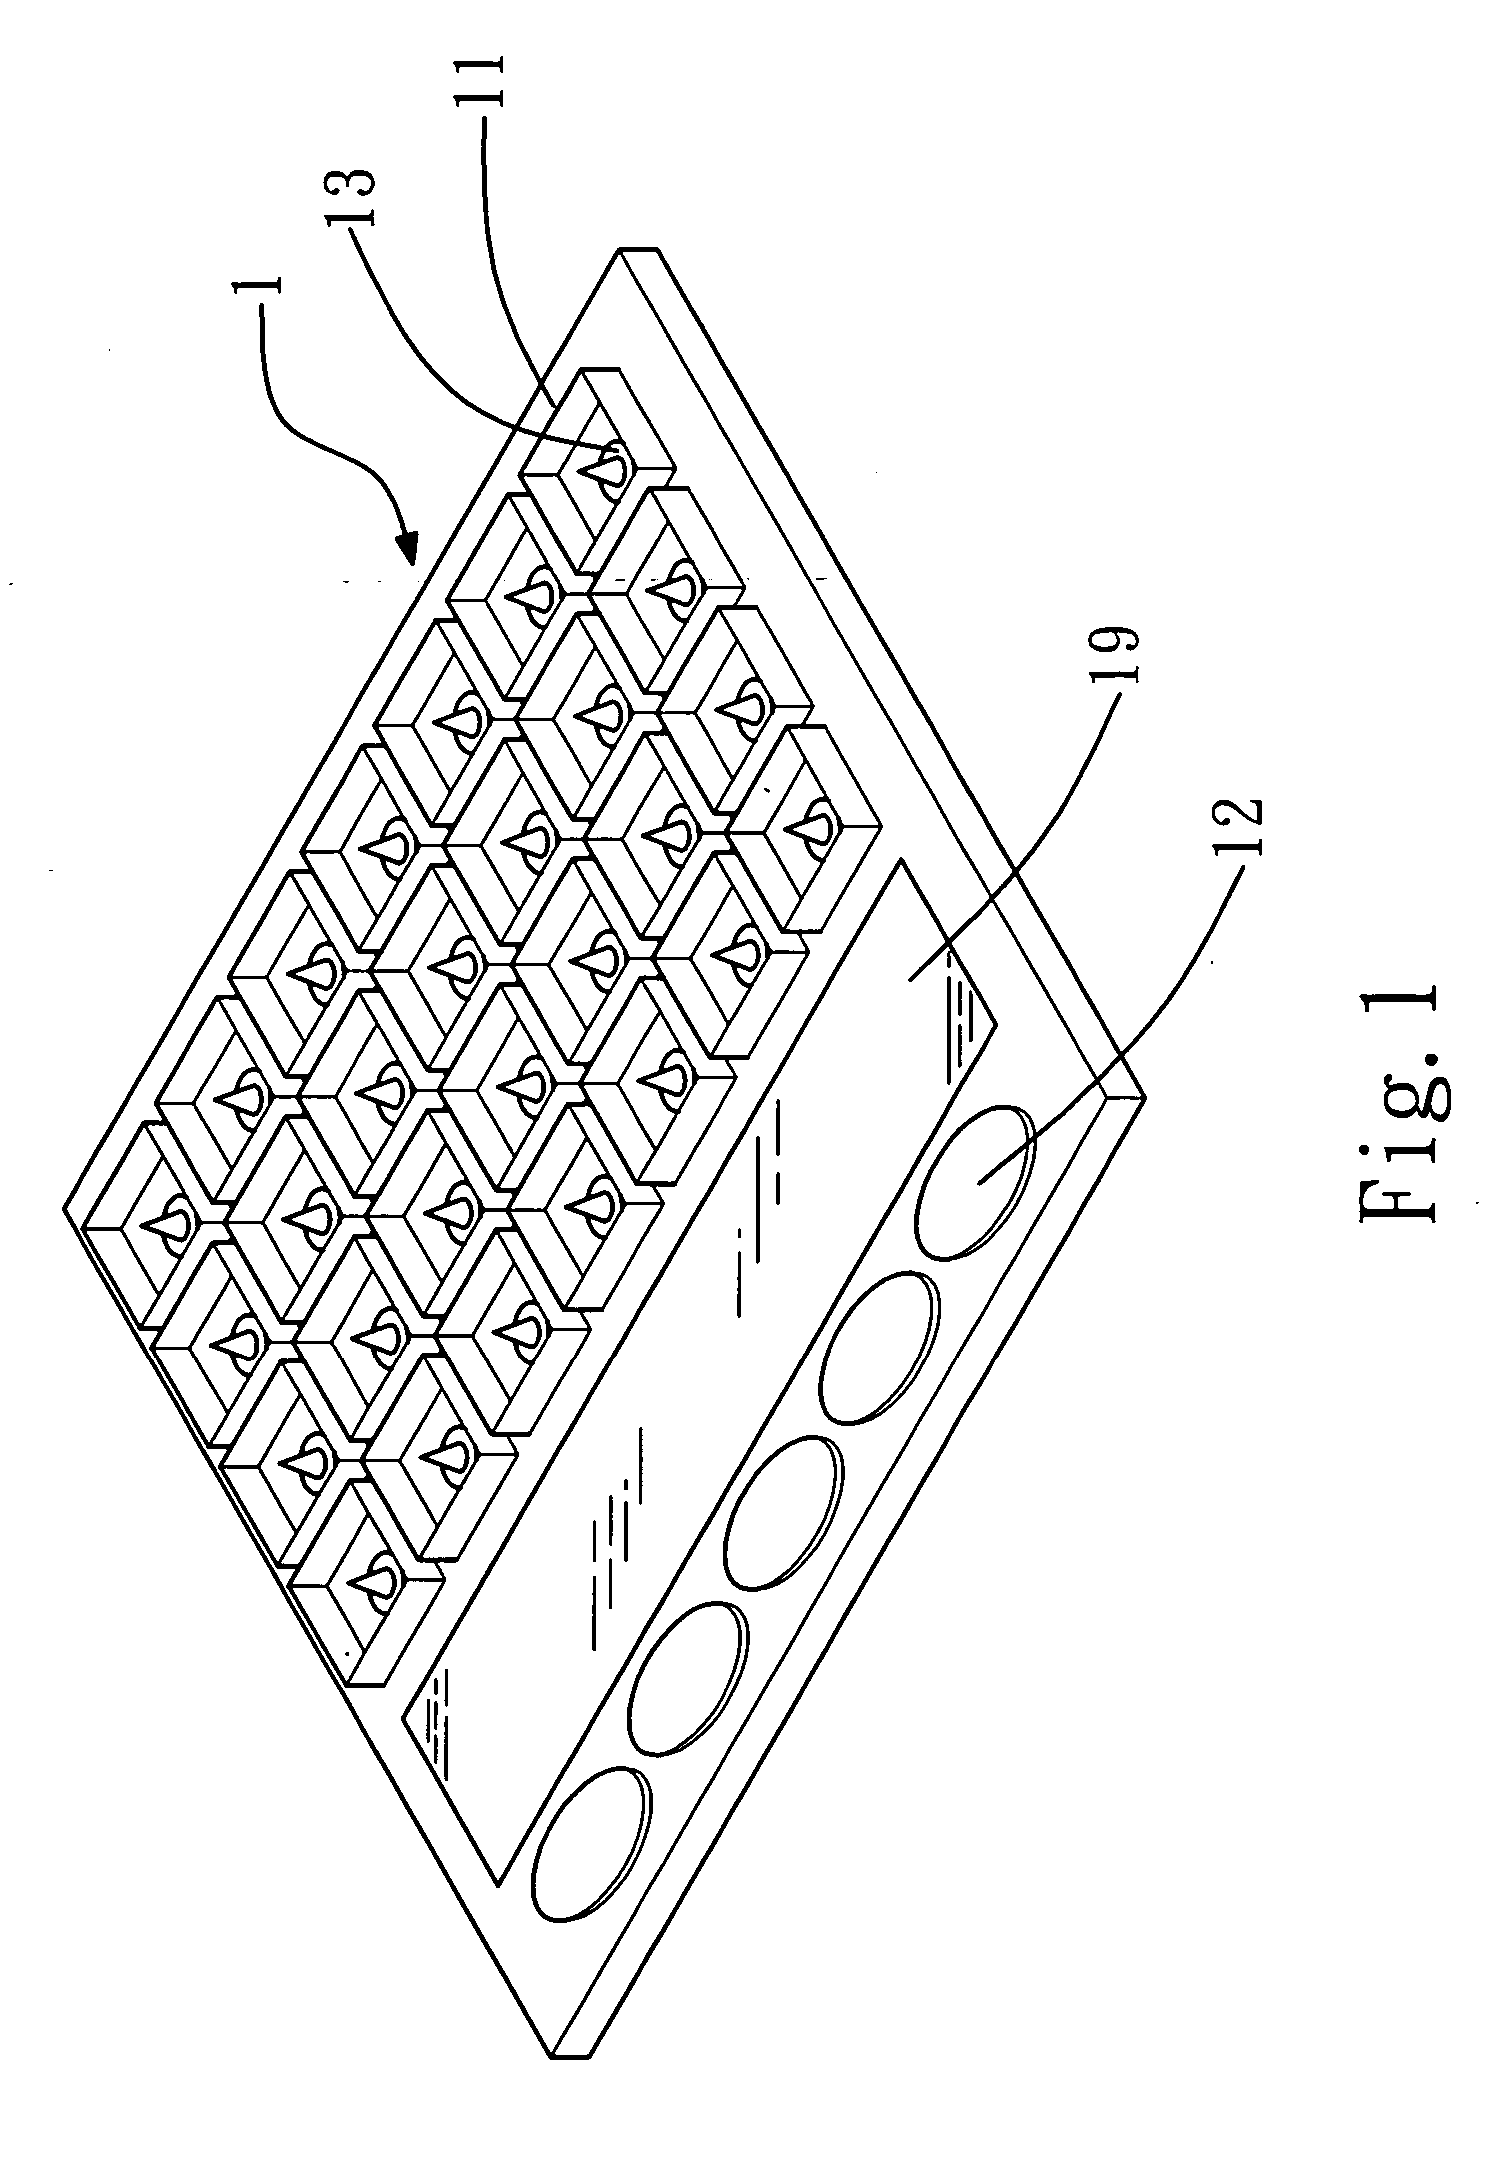 Apparatus and method for integral electrochemical biosensor